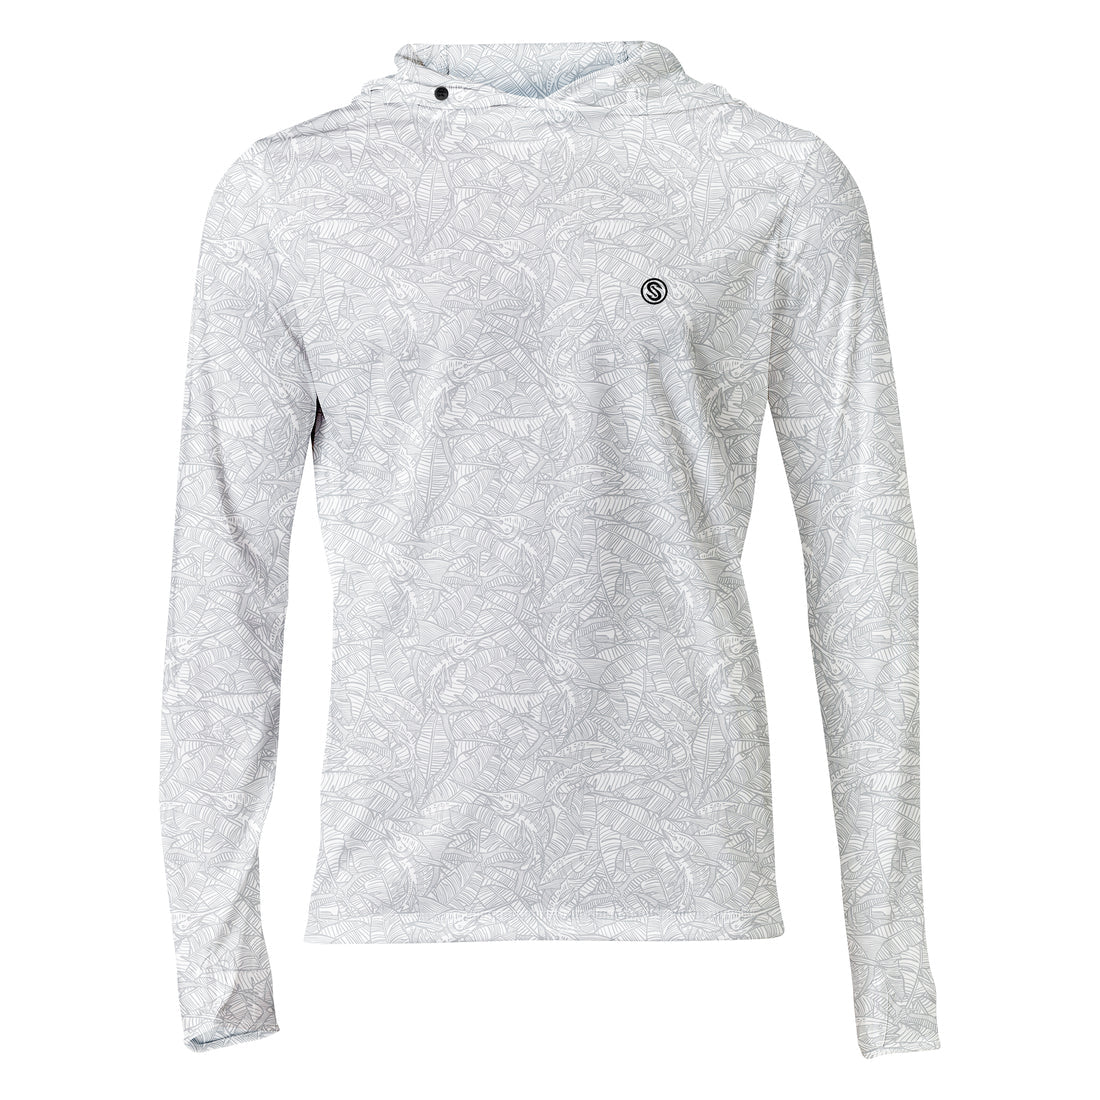 Scales Banaza Hooded Performance - White / Grey Front